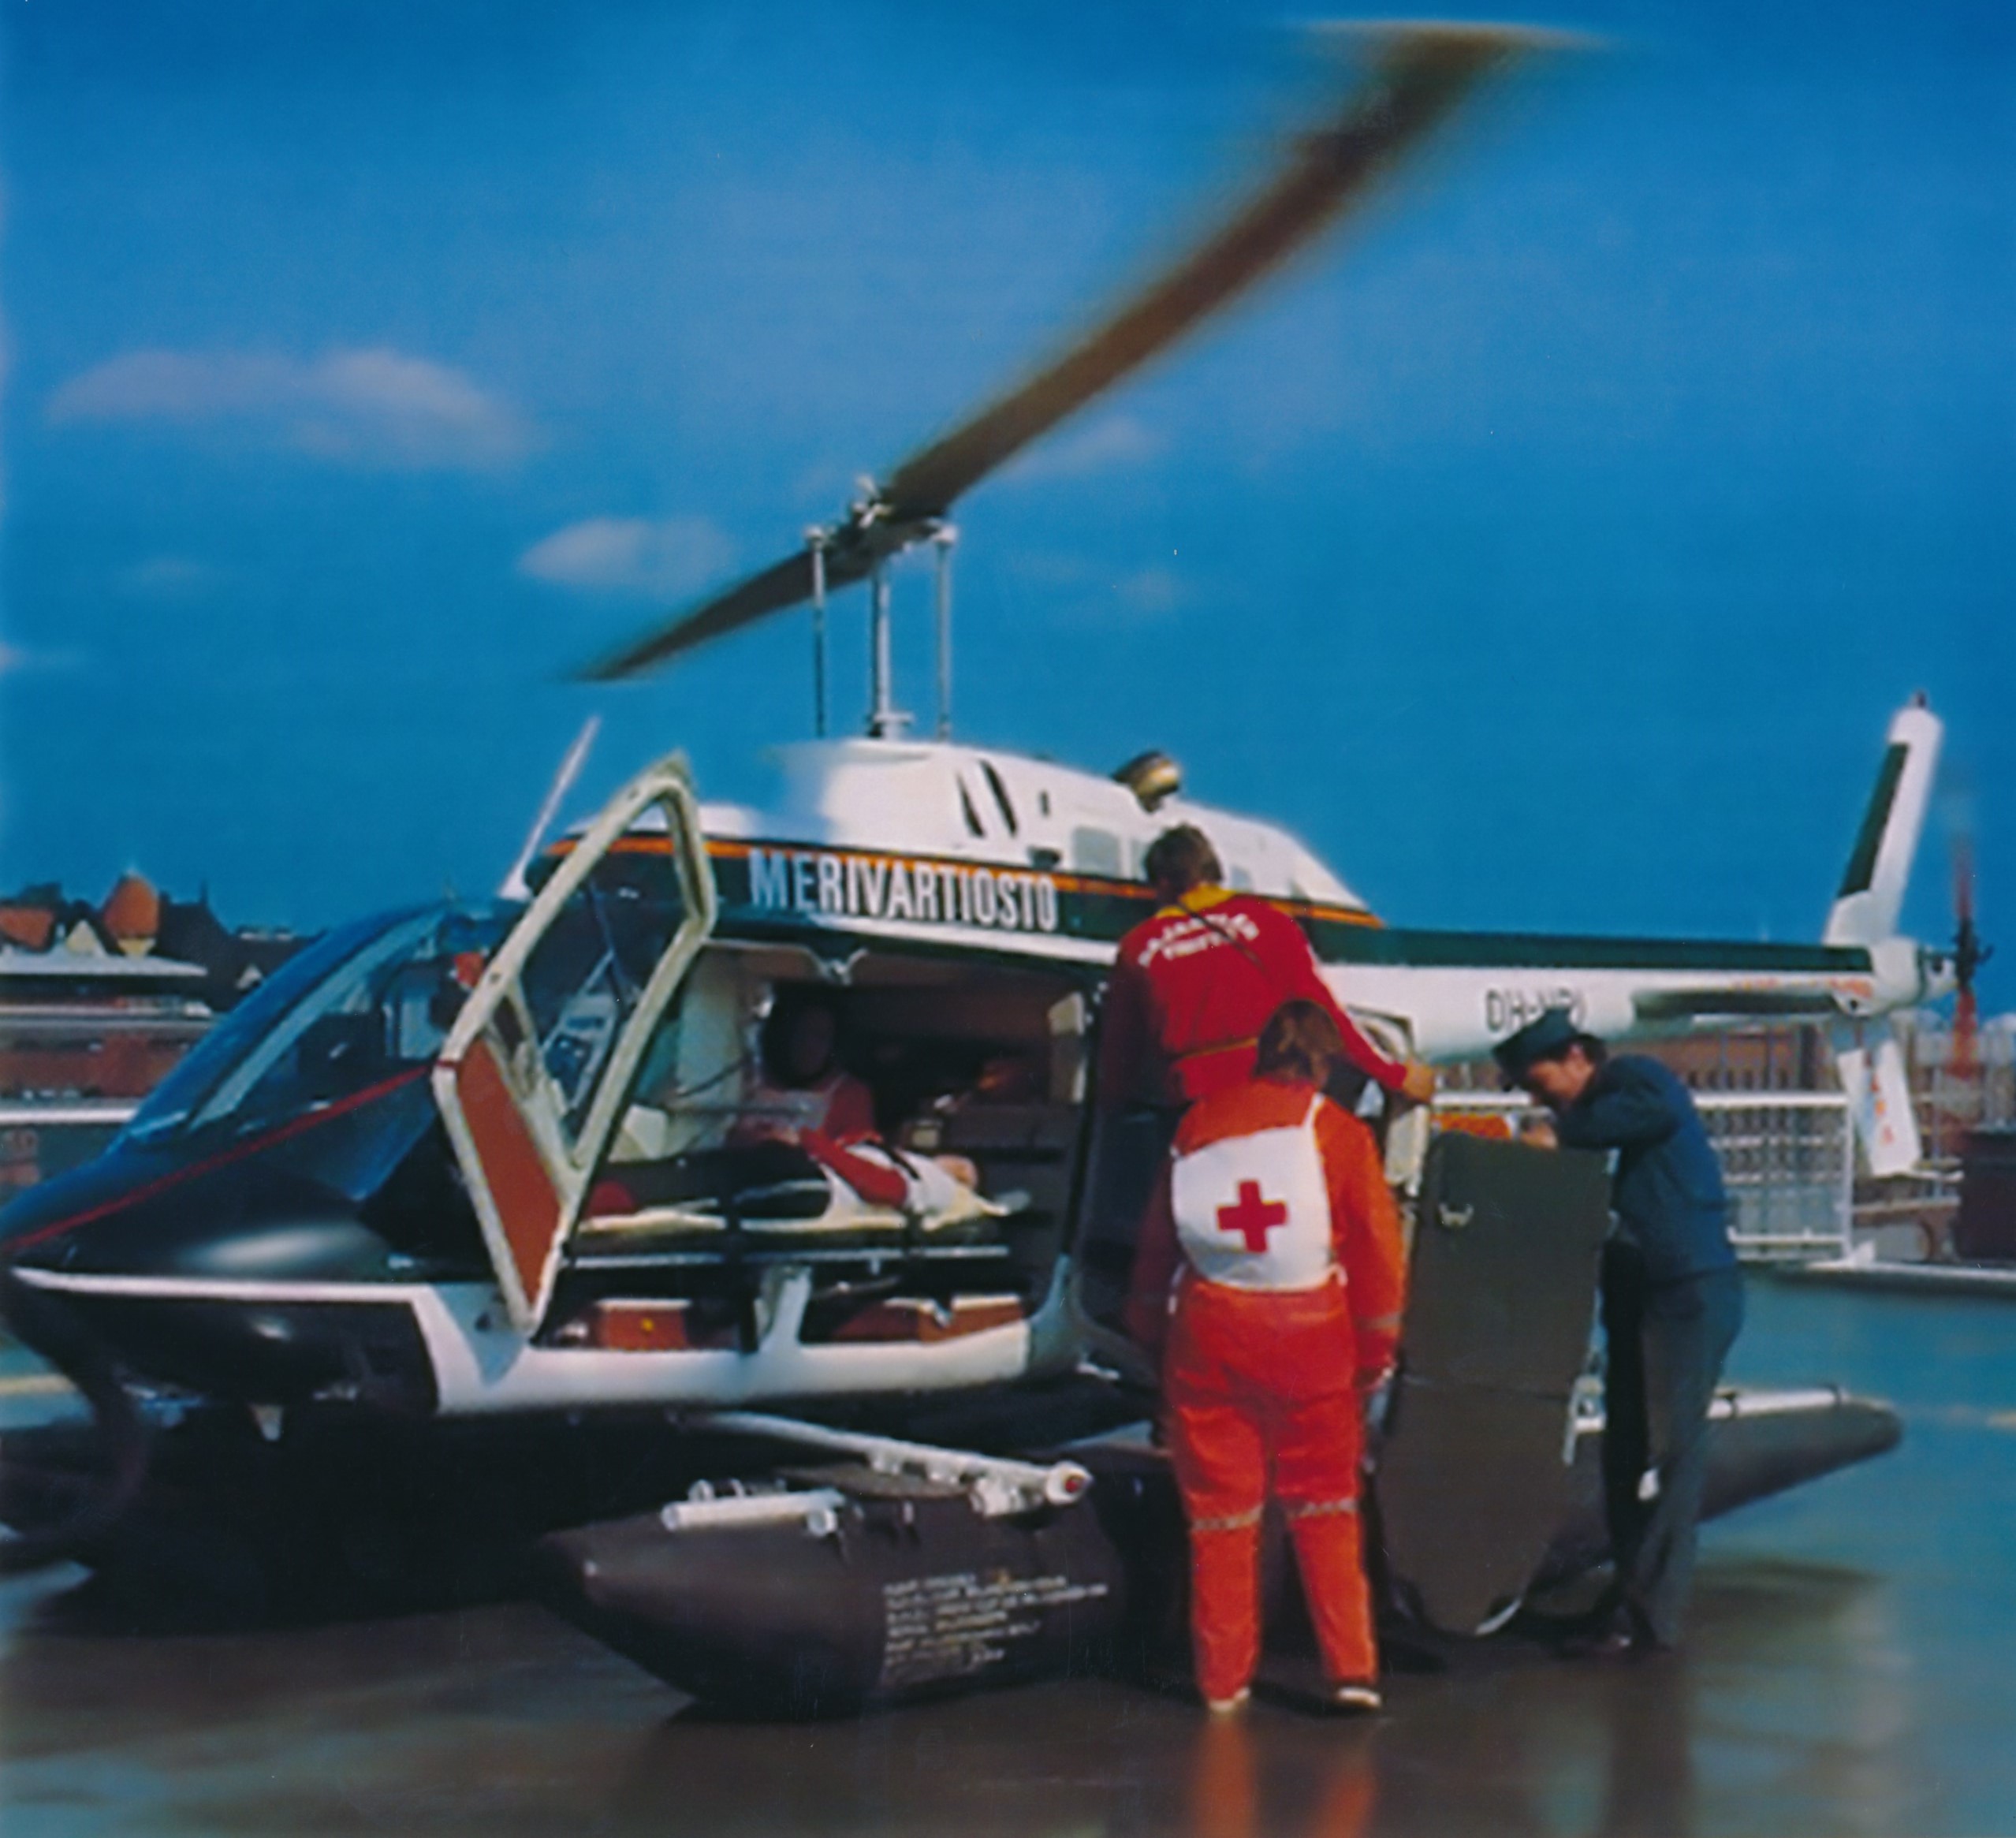 An ambulance helicopter has landed on a hospital roof. The helicopter pilot is packing up foldable stretchers. Two paramedics are standing in front of the helicopter. The patient is lying on a stretcher inside the helicopter.